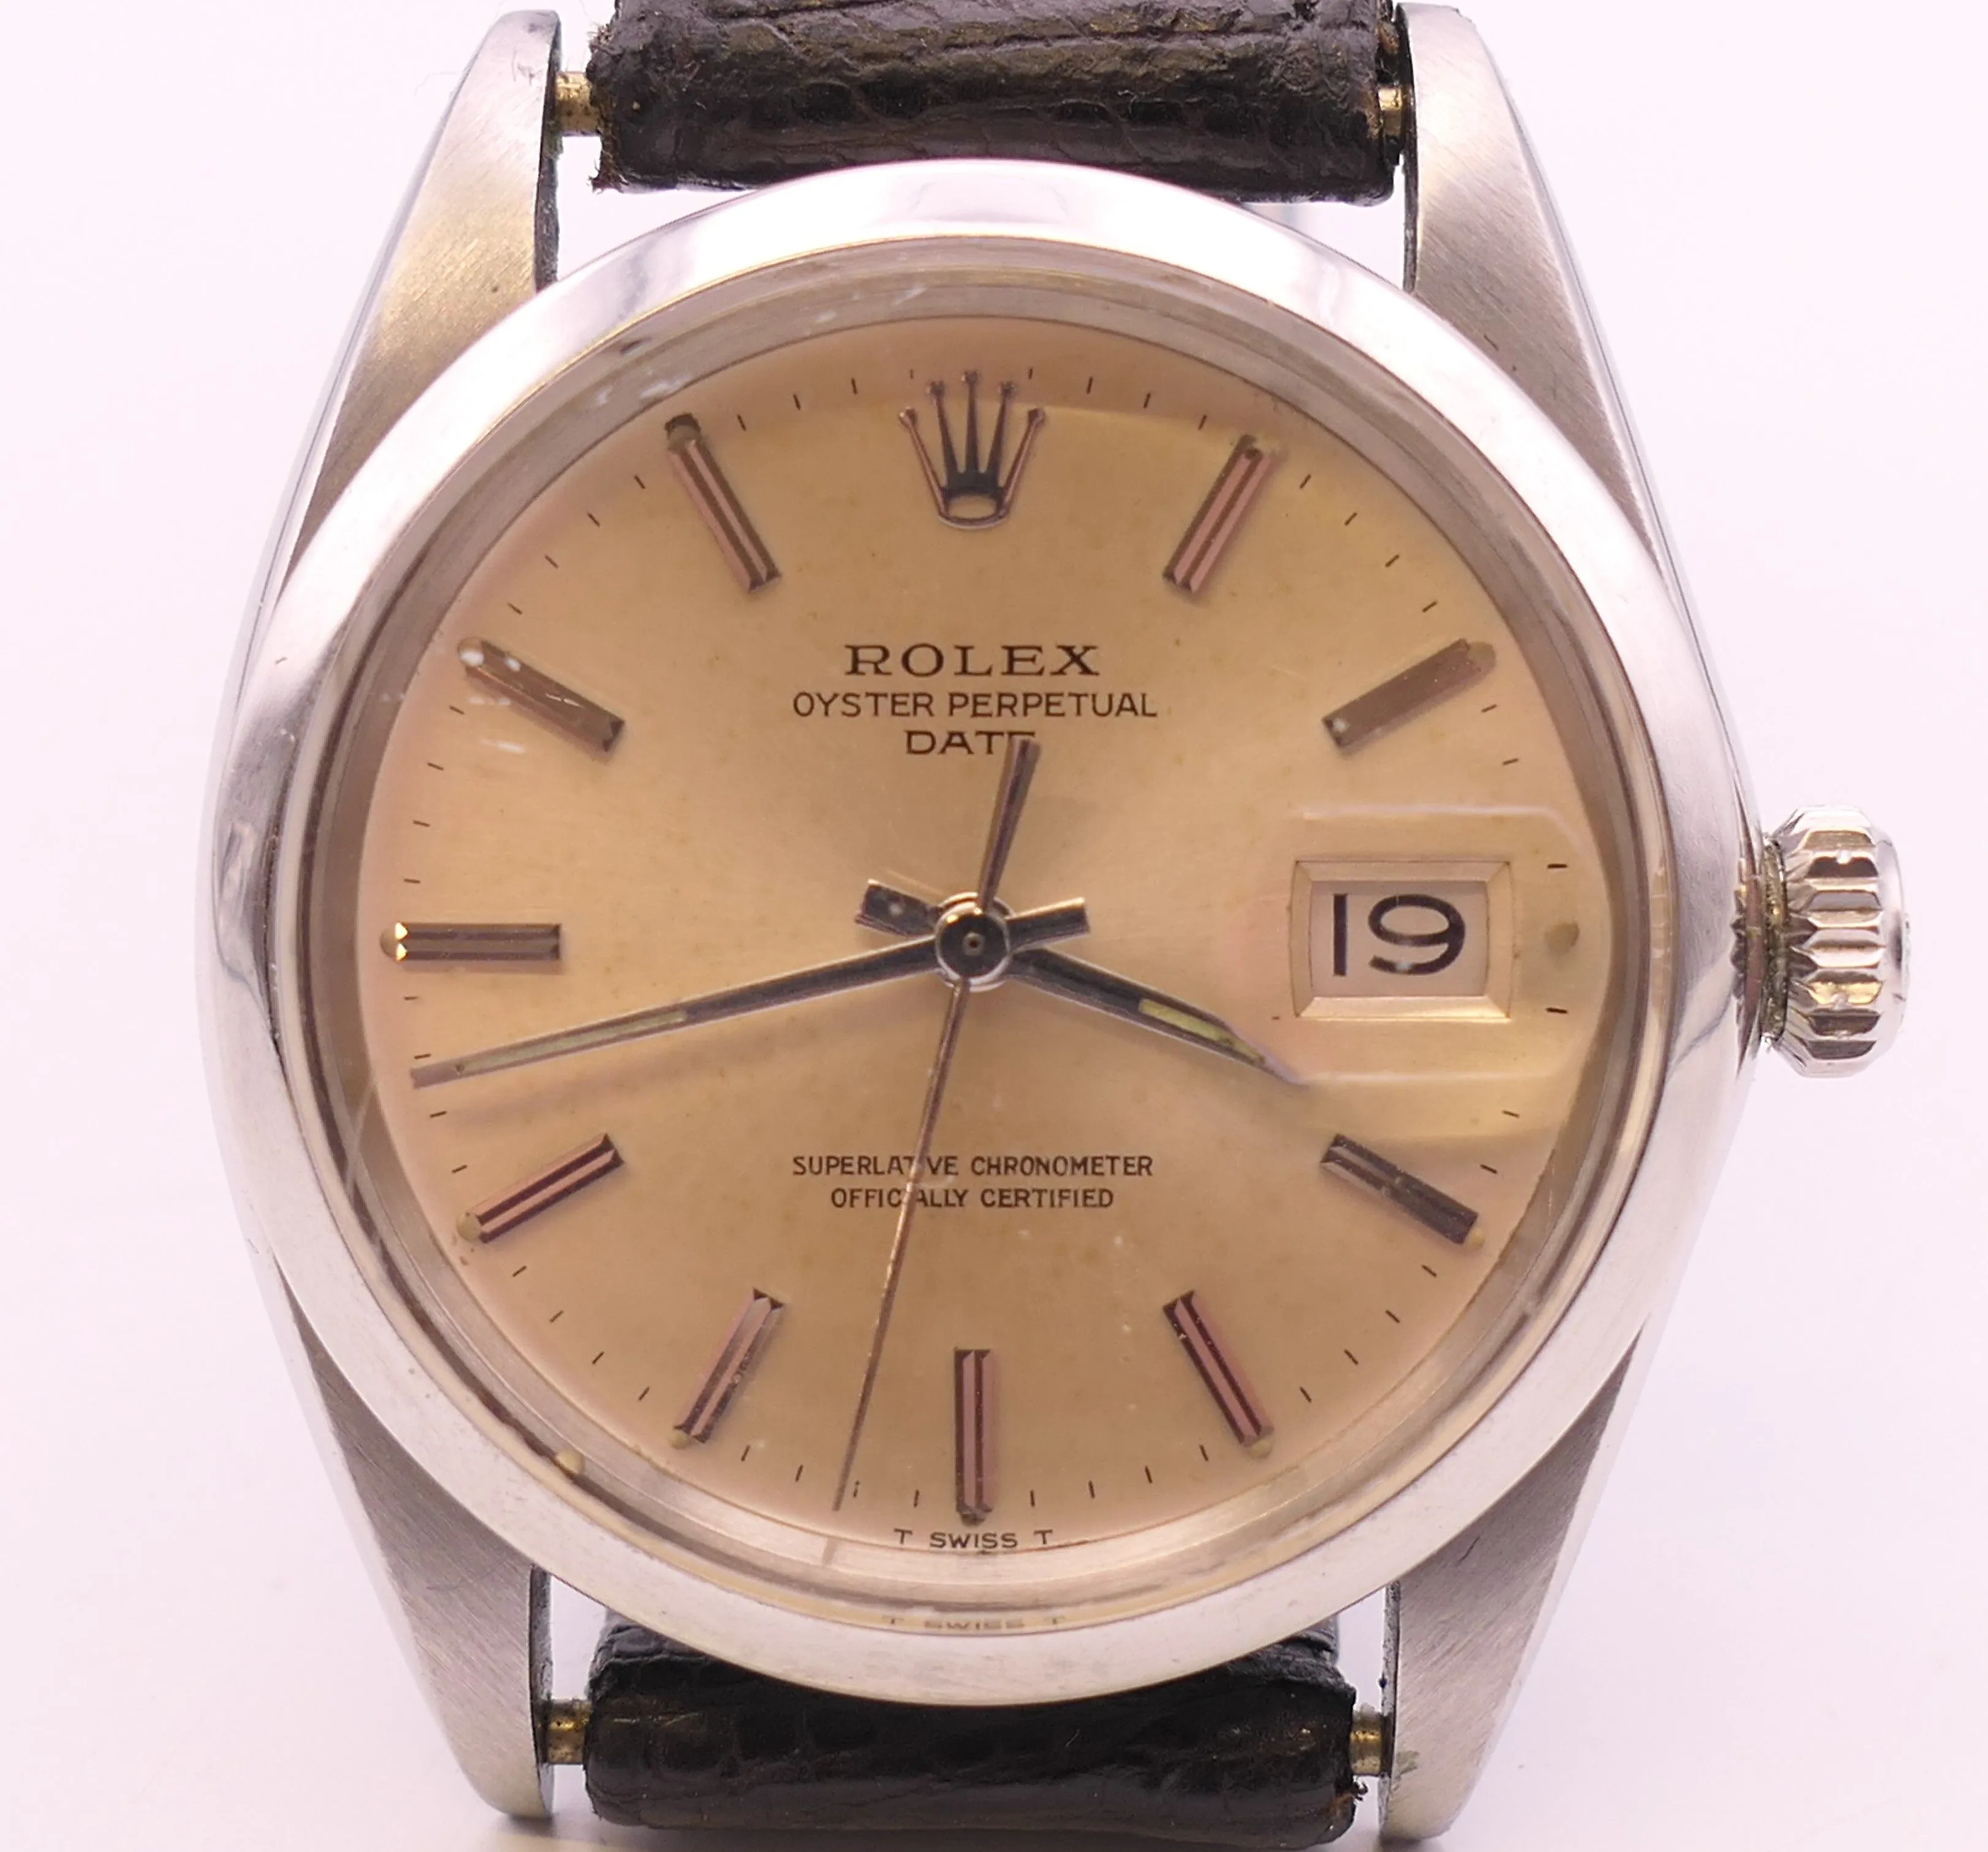 Rolex Oyster Perpetual Date 1500 37.5mm Stainless steel Silver